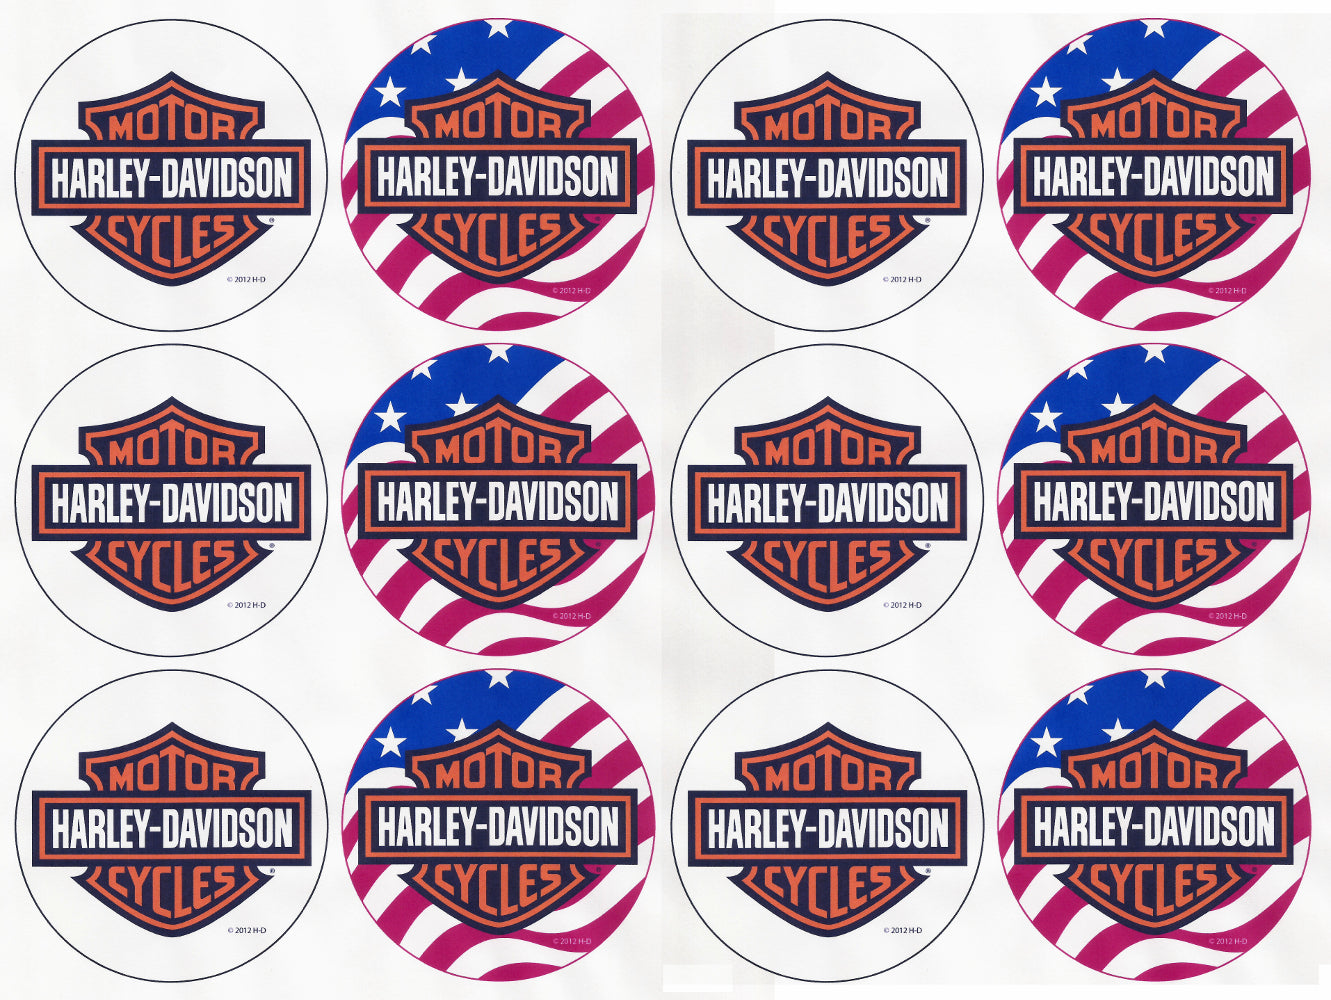 Harley-Davidson Motor Cycles Logo and the American Flag Edible Cupcake Topper Images ABPID03561